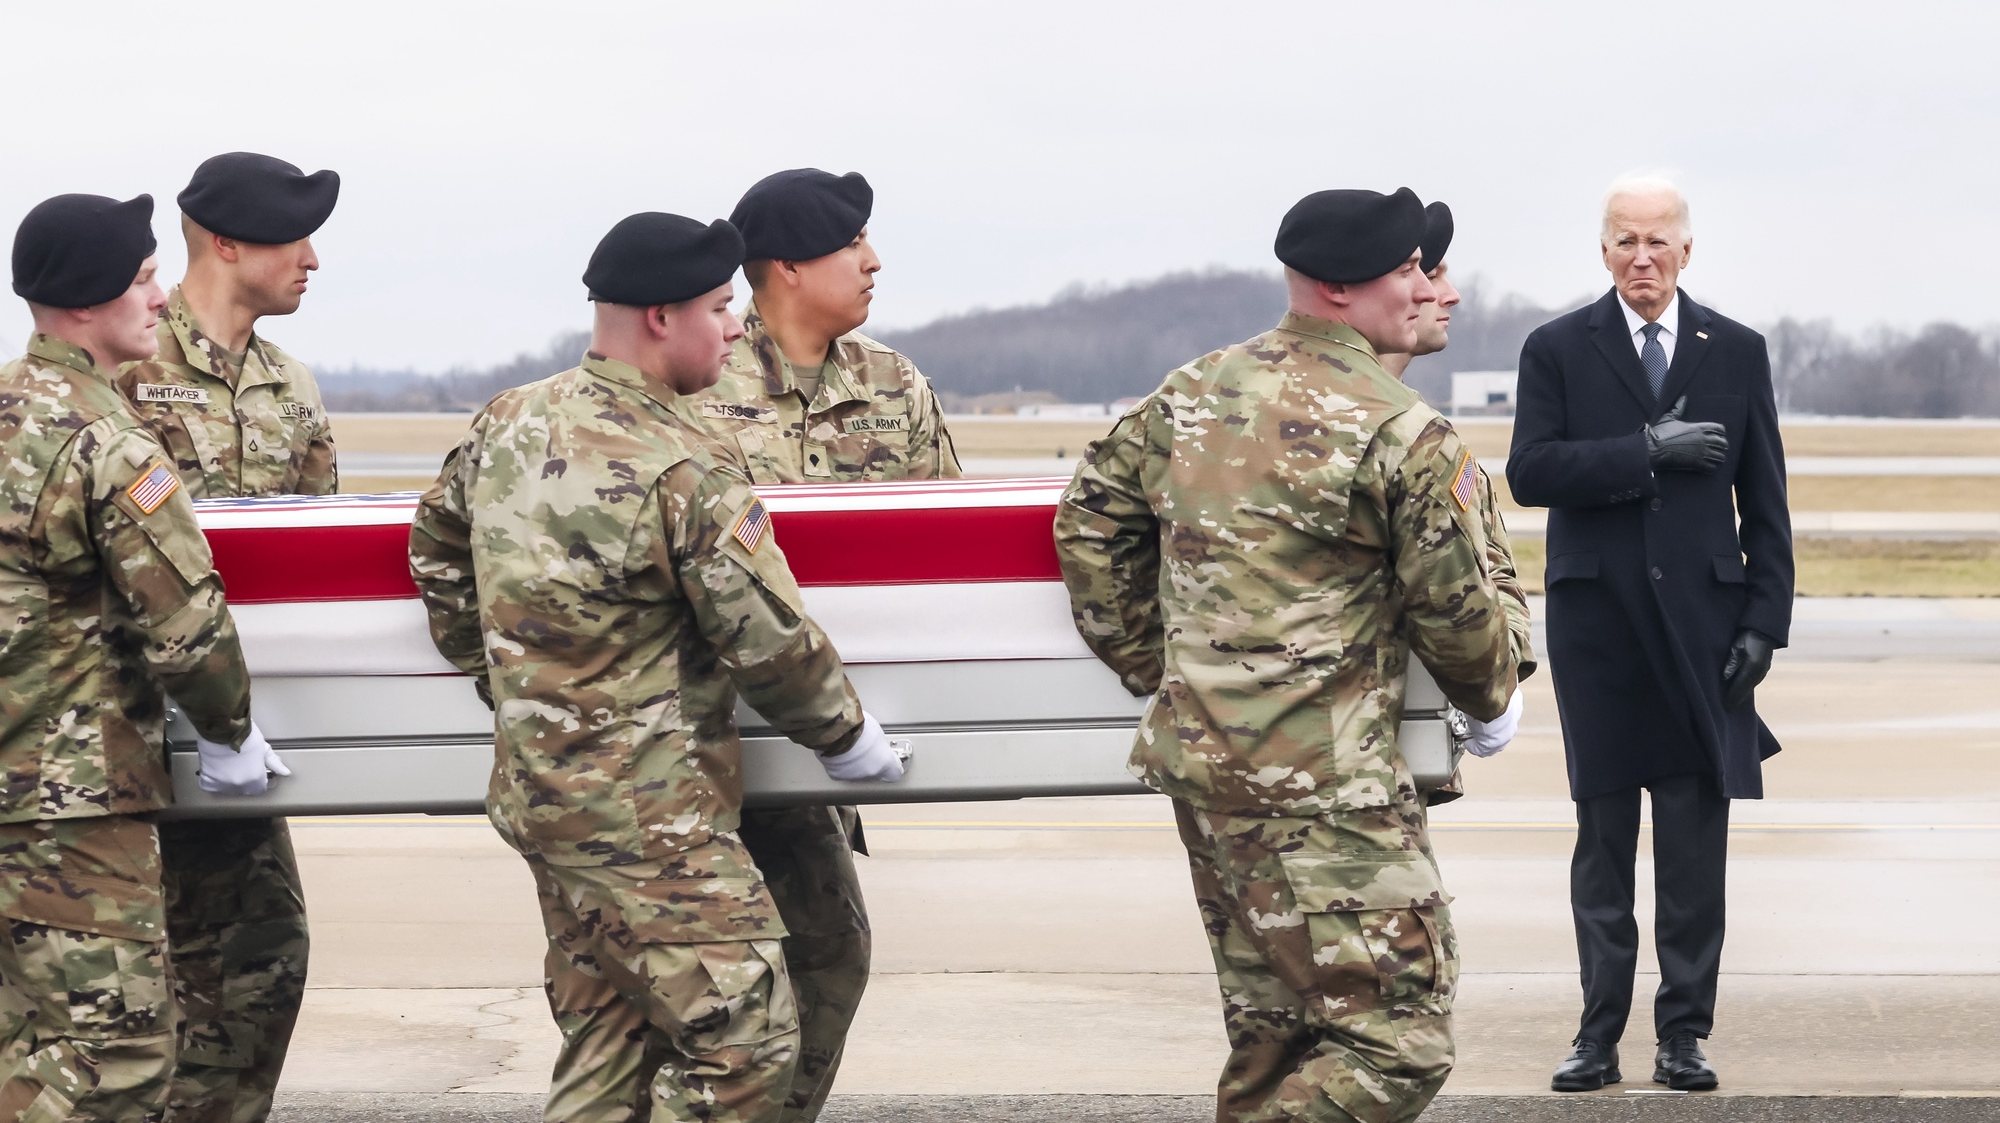 epa11121591 US President Joe Biden stands with his hand over his heart as a US Army carry team moves a flag-draped transfer case containing the remains of US Army Sergeant Breonna Moffett, during a dignified transfer of fallen US service members at Dover Air Force Base in Dover, Delaware, USA, 02 February 2024. US Army Sergeant Jerome Rivers. US Army Sergeant Breonna Moffett, and US Army Sergeant Kennedy Sanders died in a drone strike on 28 January at a military base in Jordan; forty other US troops were also injured in the attack. The enemy drone, which the White House has blamed on an Iran-backed militia, may have been mistaken for a US drone and left unimpeded, according to a preliminary report.  EPA/MICHAEL REYNOLDS